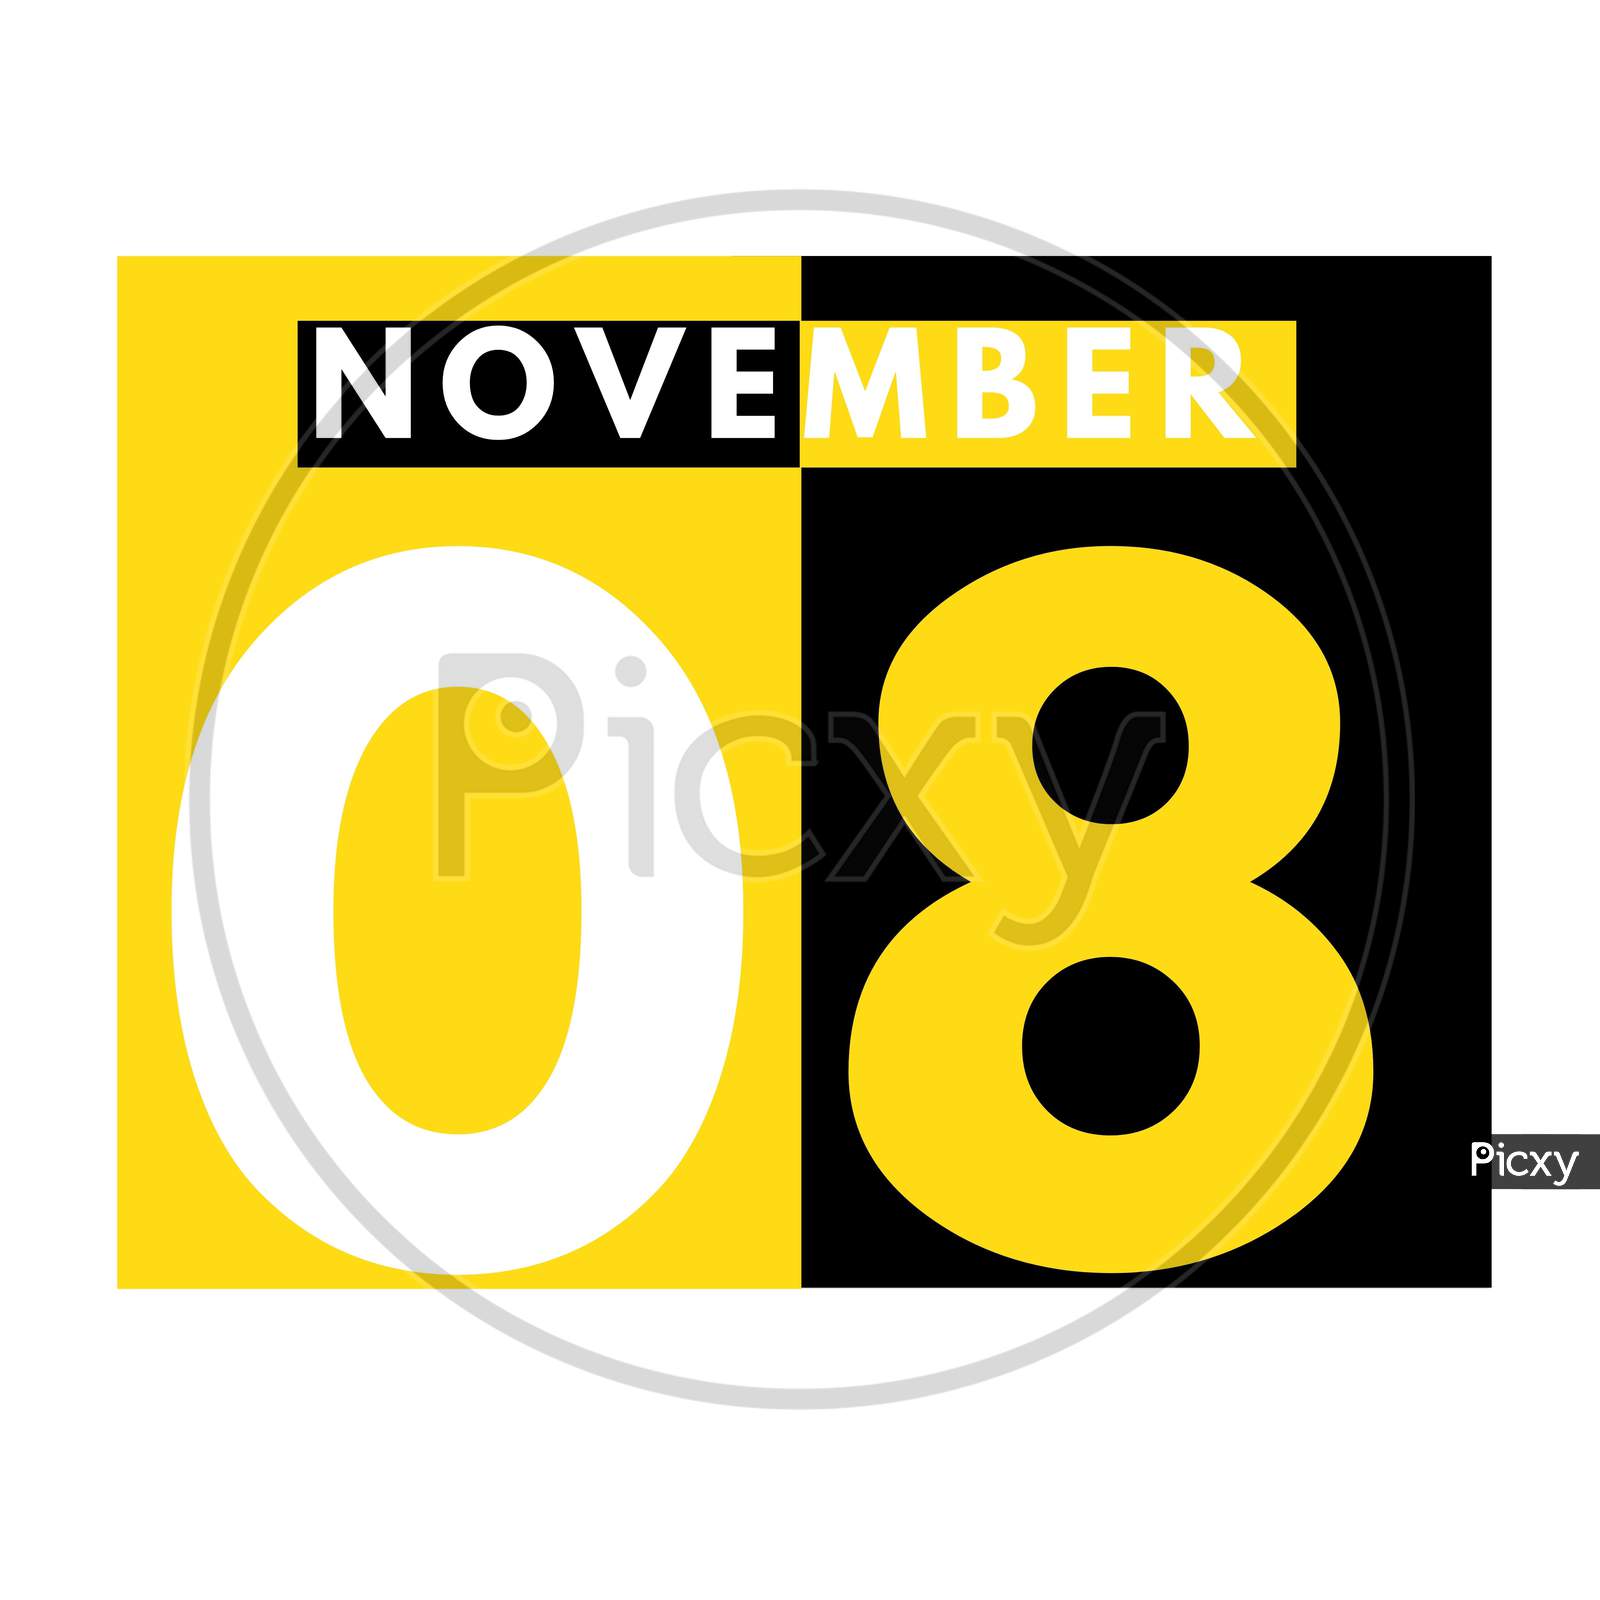 November 8 . Modern Daily Calendar Icon .Date ,Day, Month .Calendar For The Month Of November